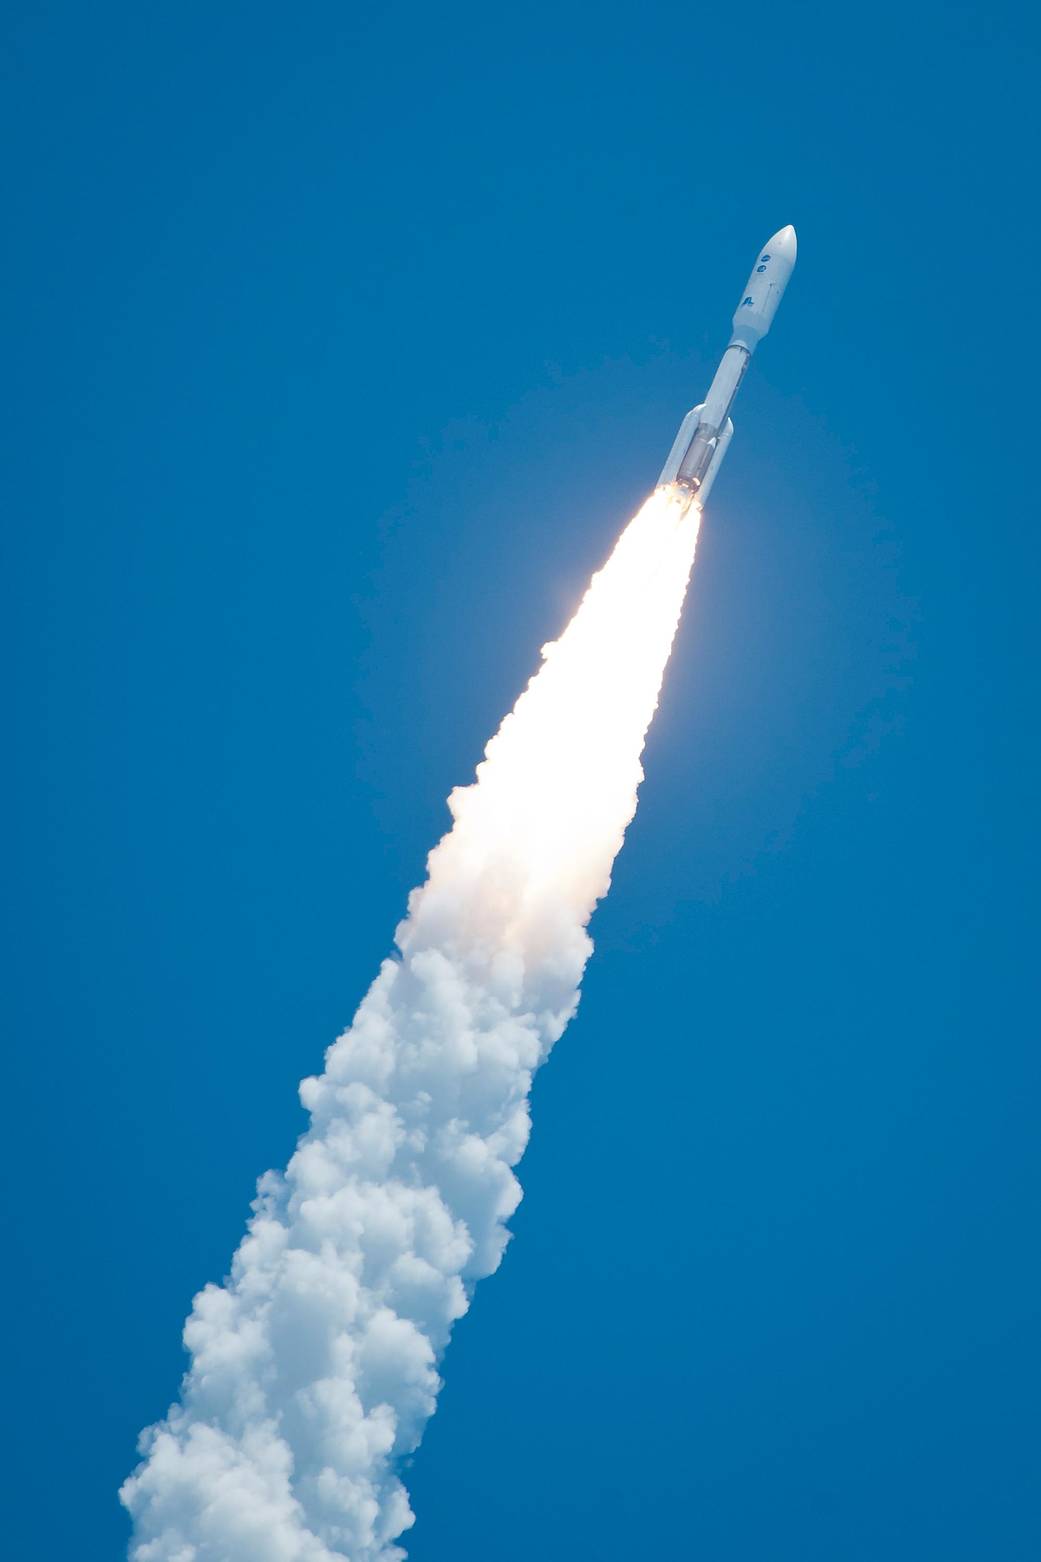 The Juno spacecraft, safely enclosed in the payload fairing at the top of an Atlas V rocket, begins its journey to Jupiter with a spectacular midday launch.